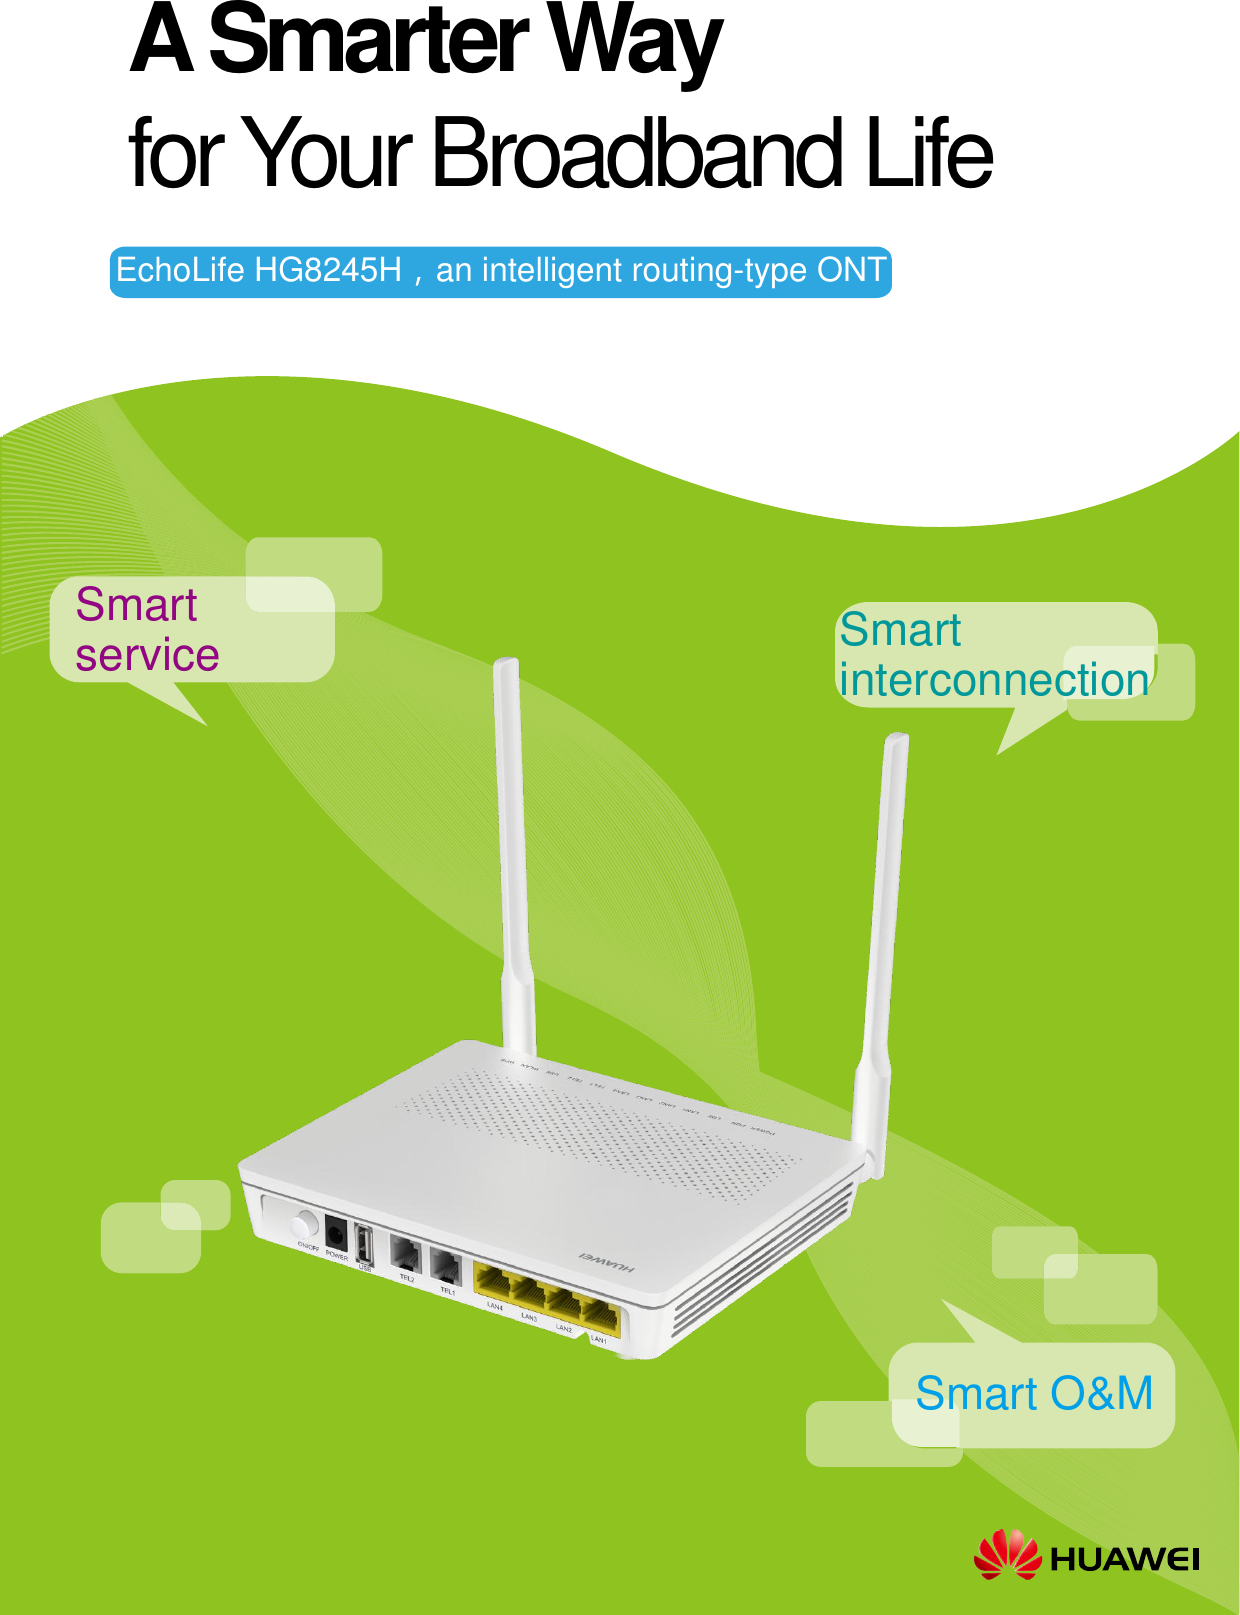 EchoLife HG8245H，an intelligent routing-type ONTSmart service Smart interconnectionSmart O&amp;MA Smarter Way for Your Broadband Life